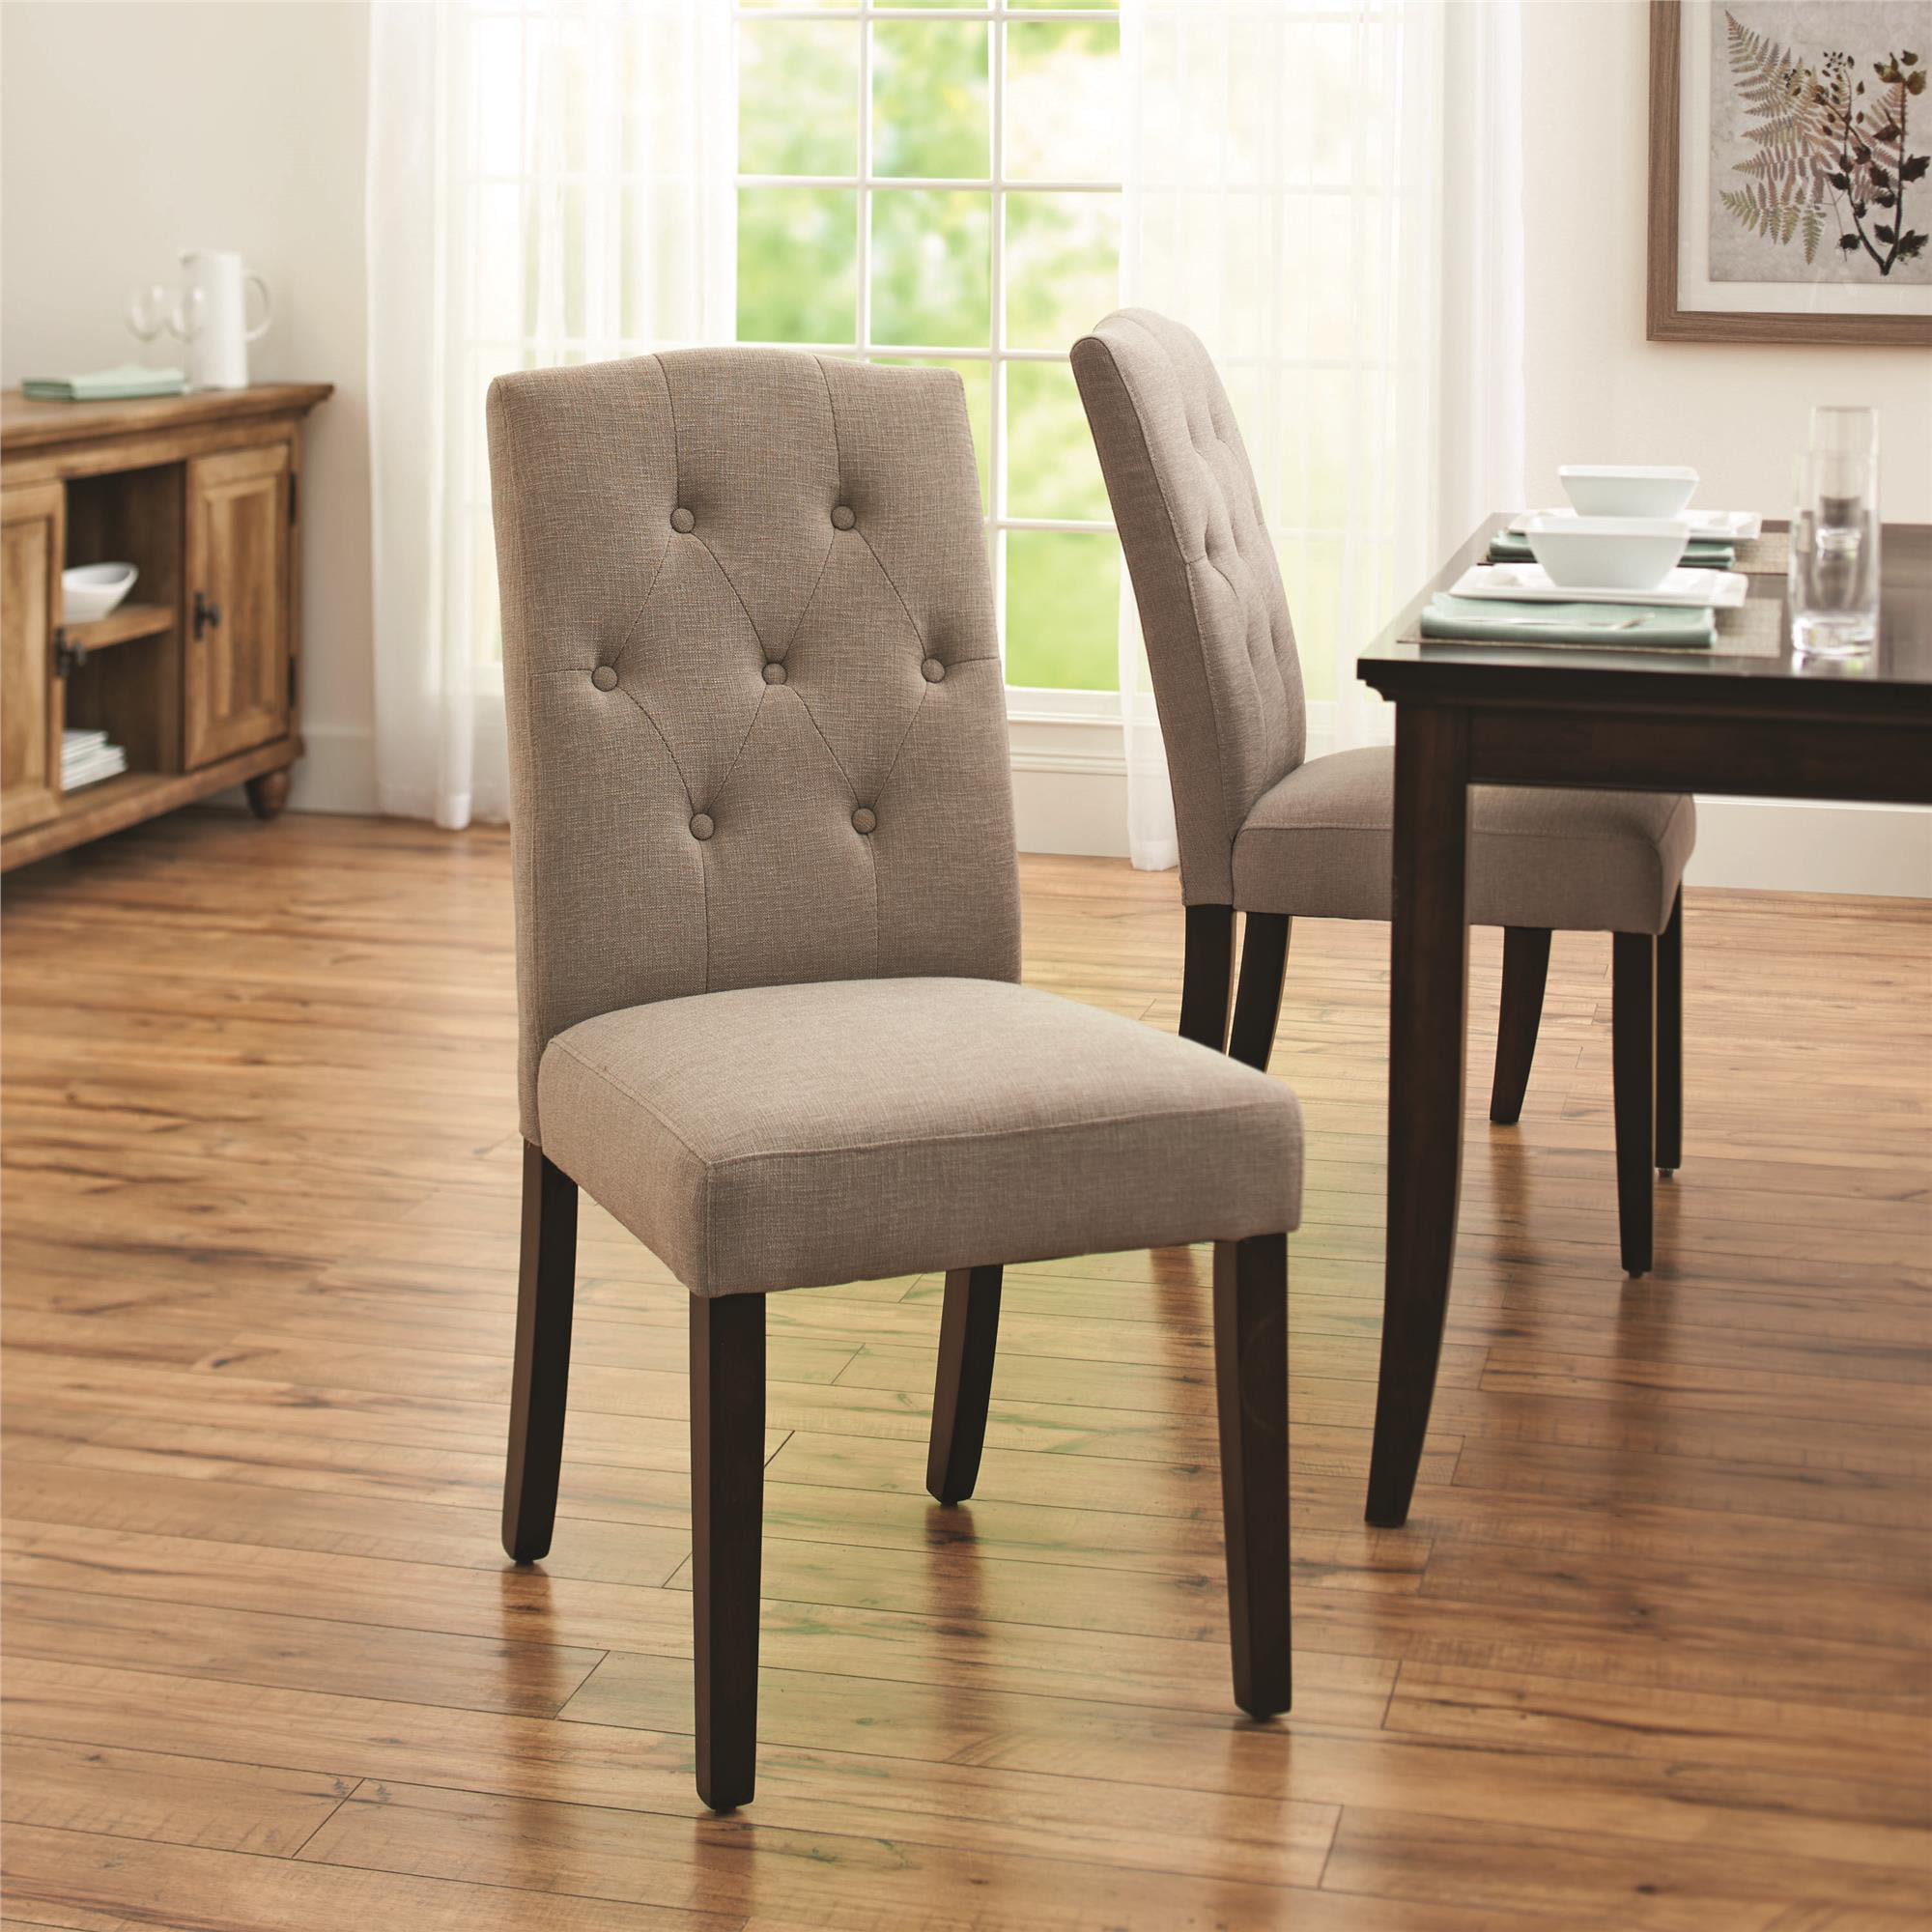 At Home Dining Chairs Chair Chairs Dining Homes Taupe Upholstered Parsons Better Gardens Room Tufted Piece Walmart Types Table Beige Styles Included Find Multiple